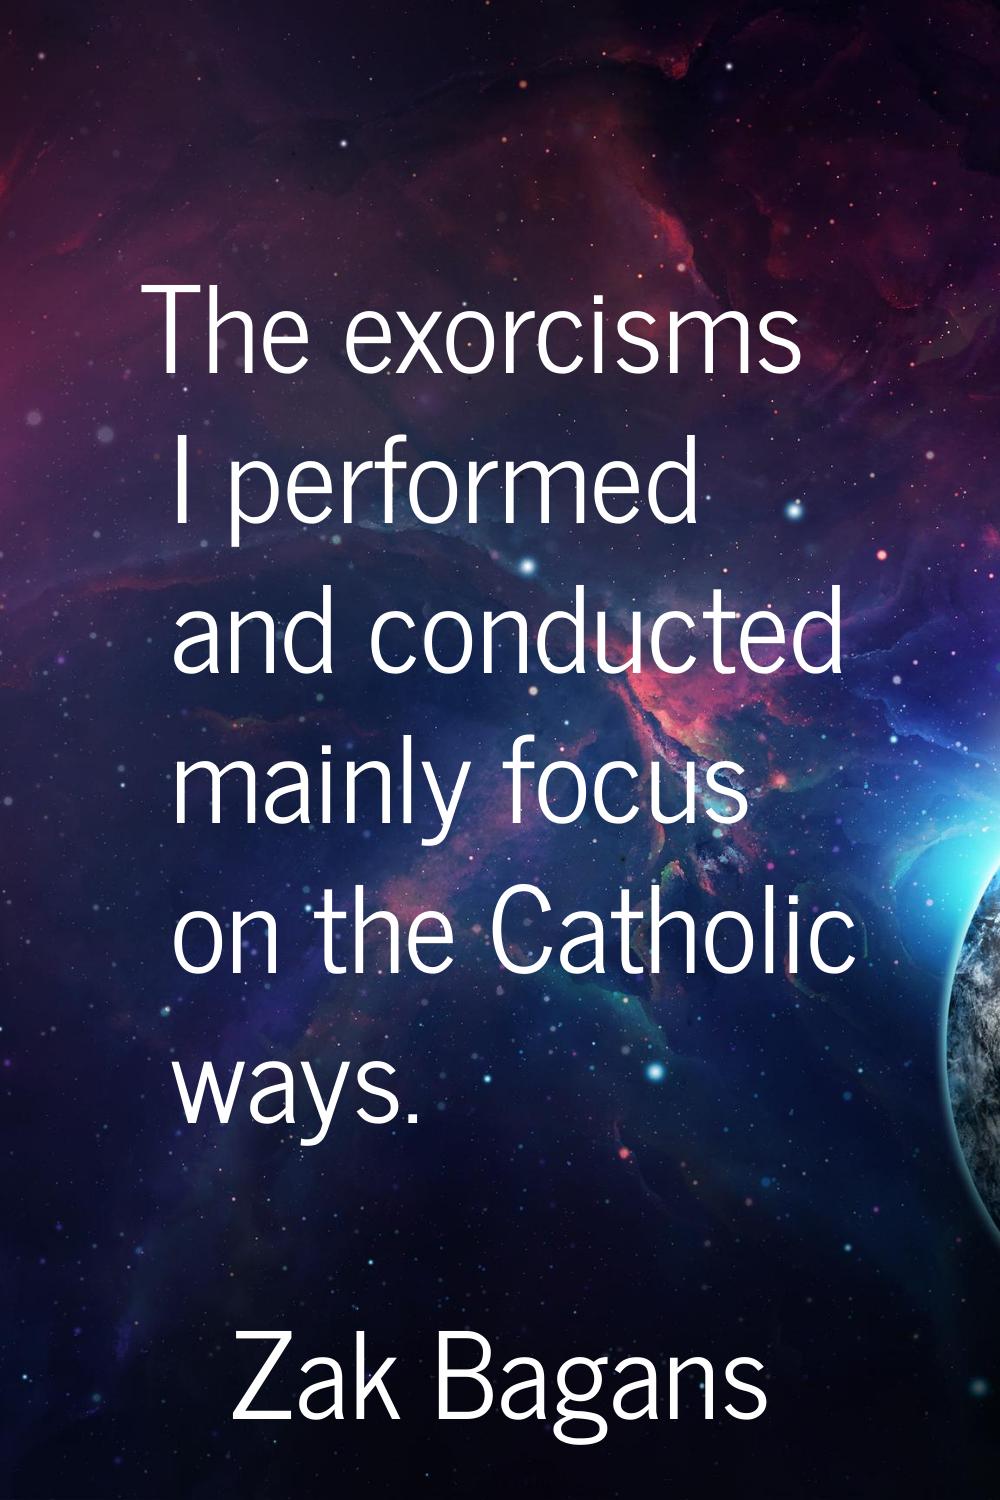 The exorcisms I performed and conducted mainly focus on the Catholic ways.